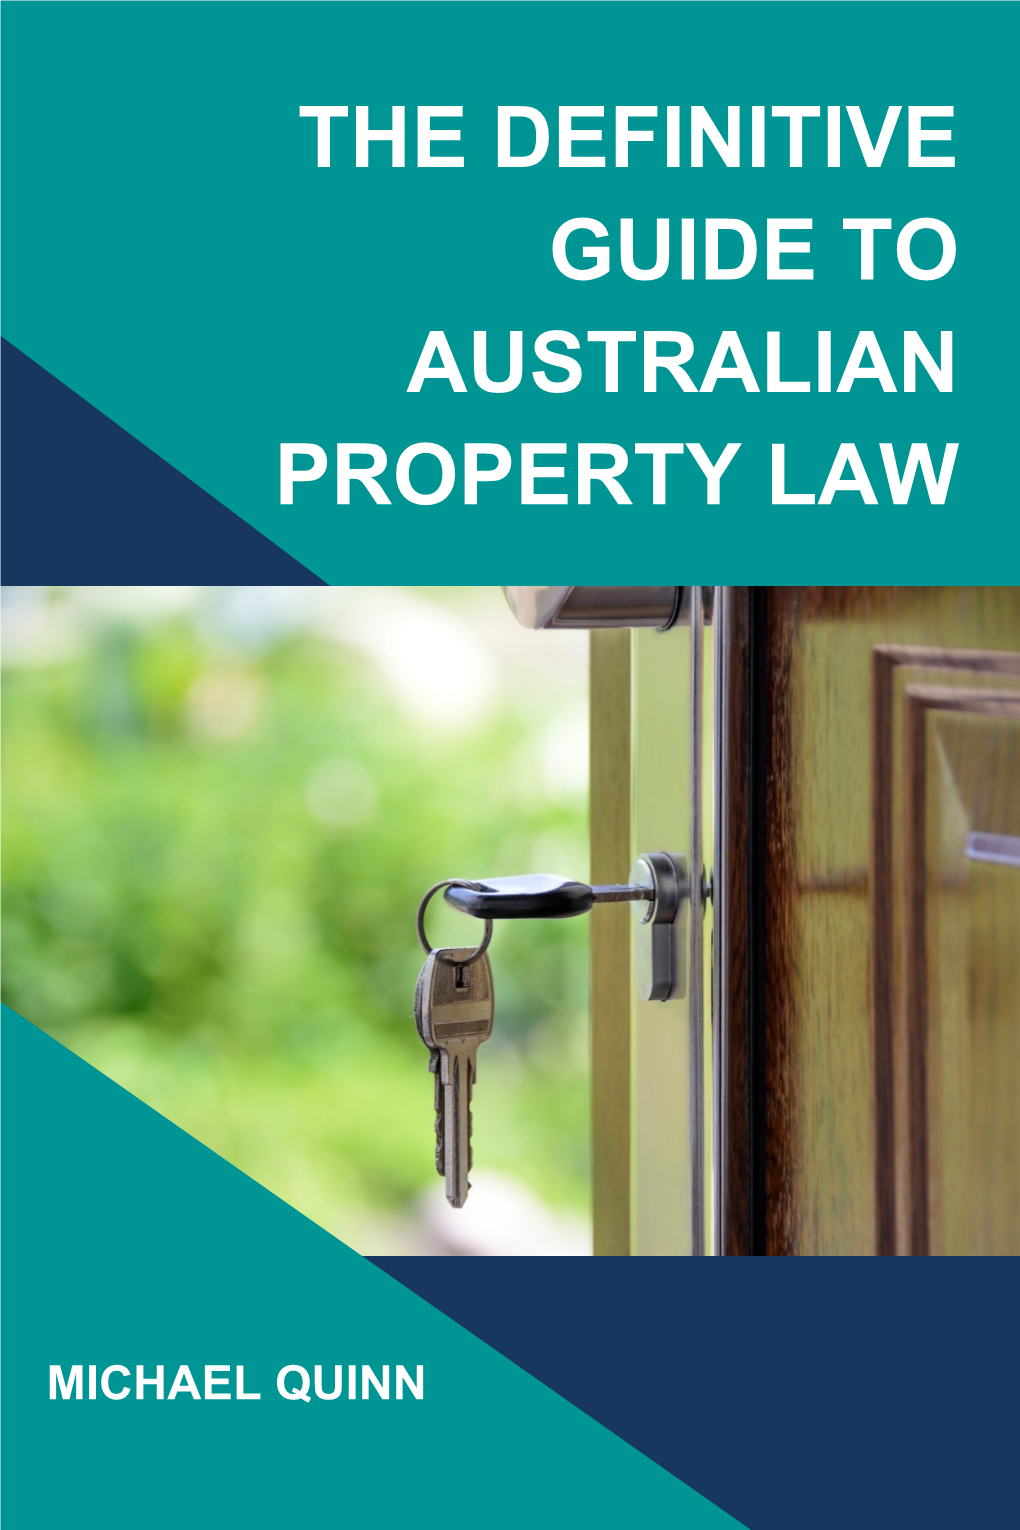 The Definitive Guide to Australian Property Law Michael Quinn ISBN 978-0-6487930-2-1